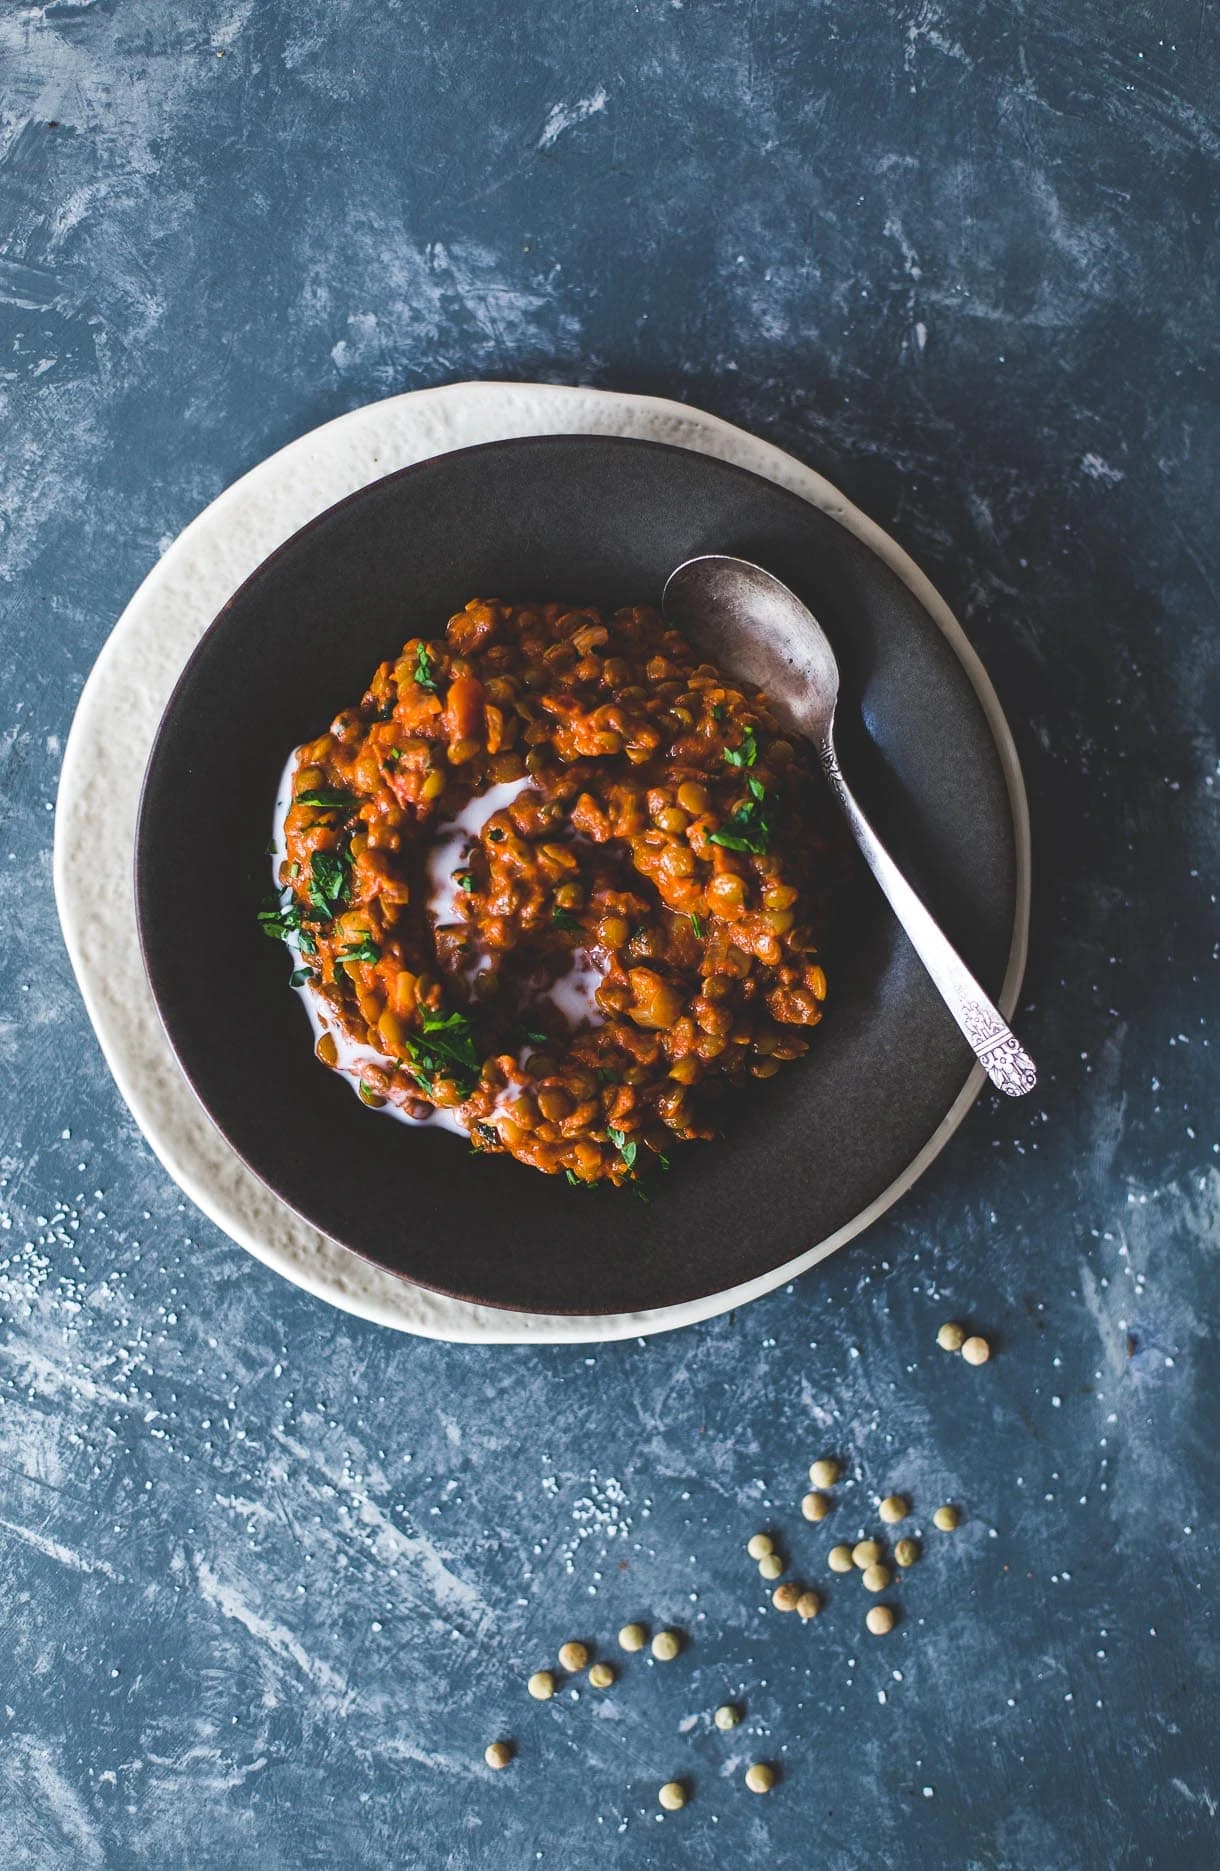 Smoky Tomato Lentils cooked in Coconut Milk {gluten-free, dairy-free}